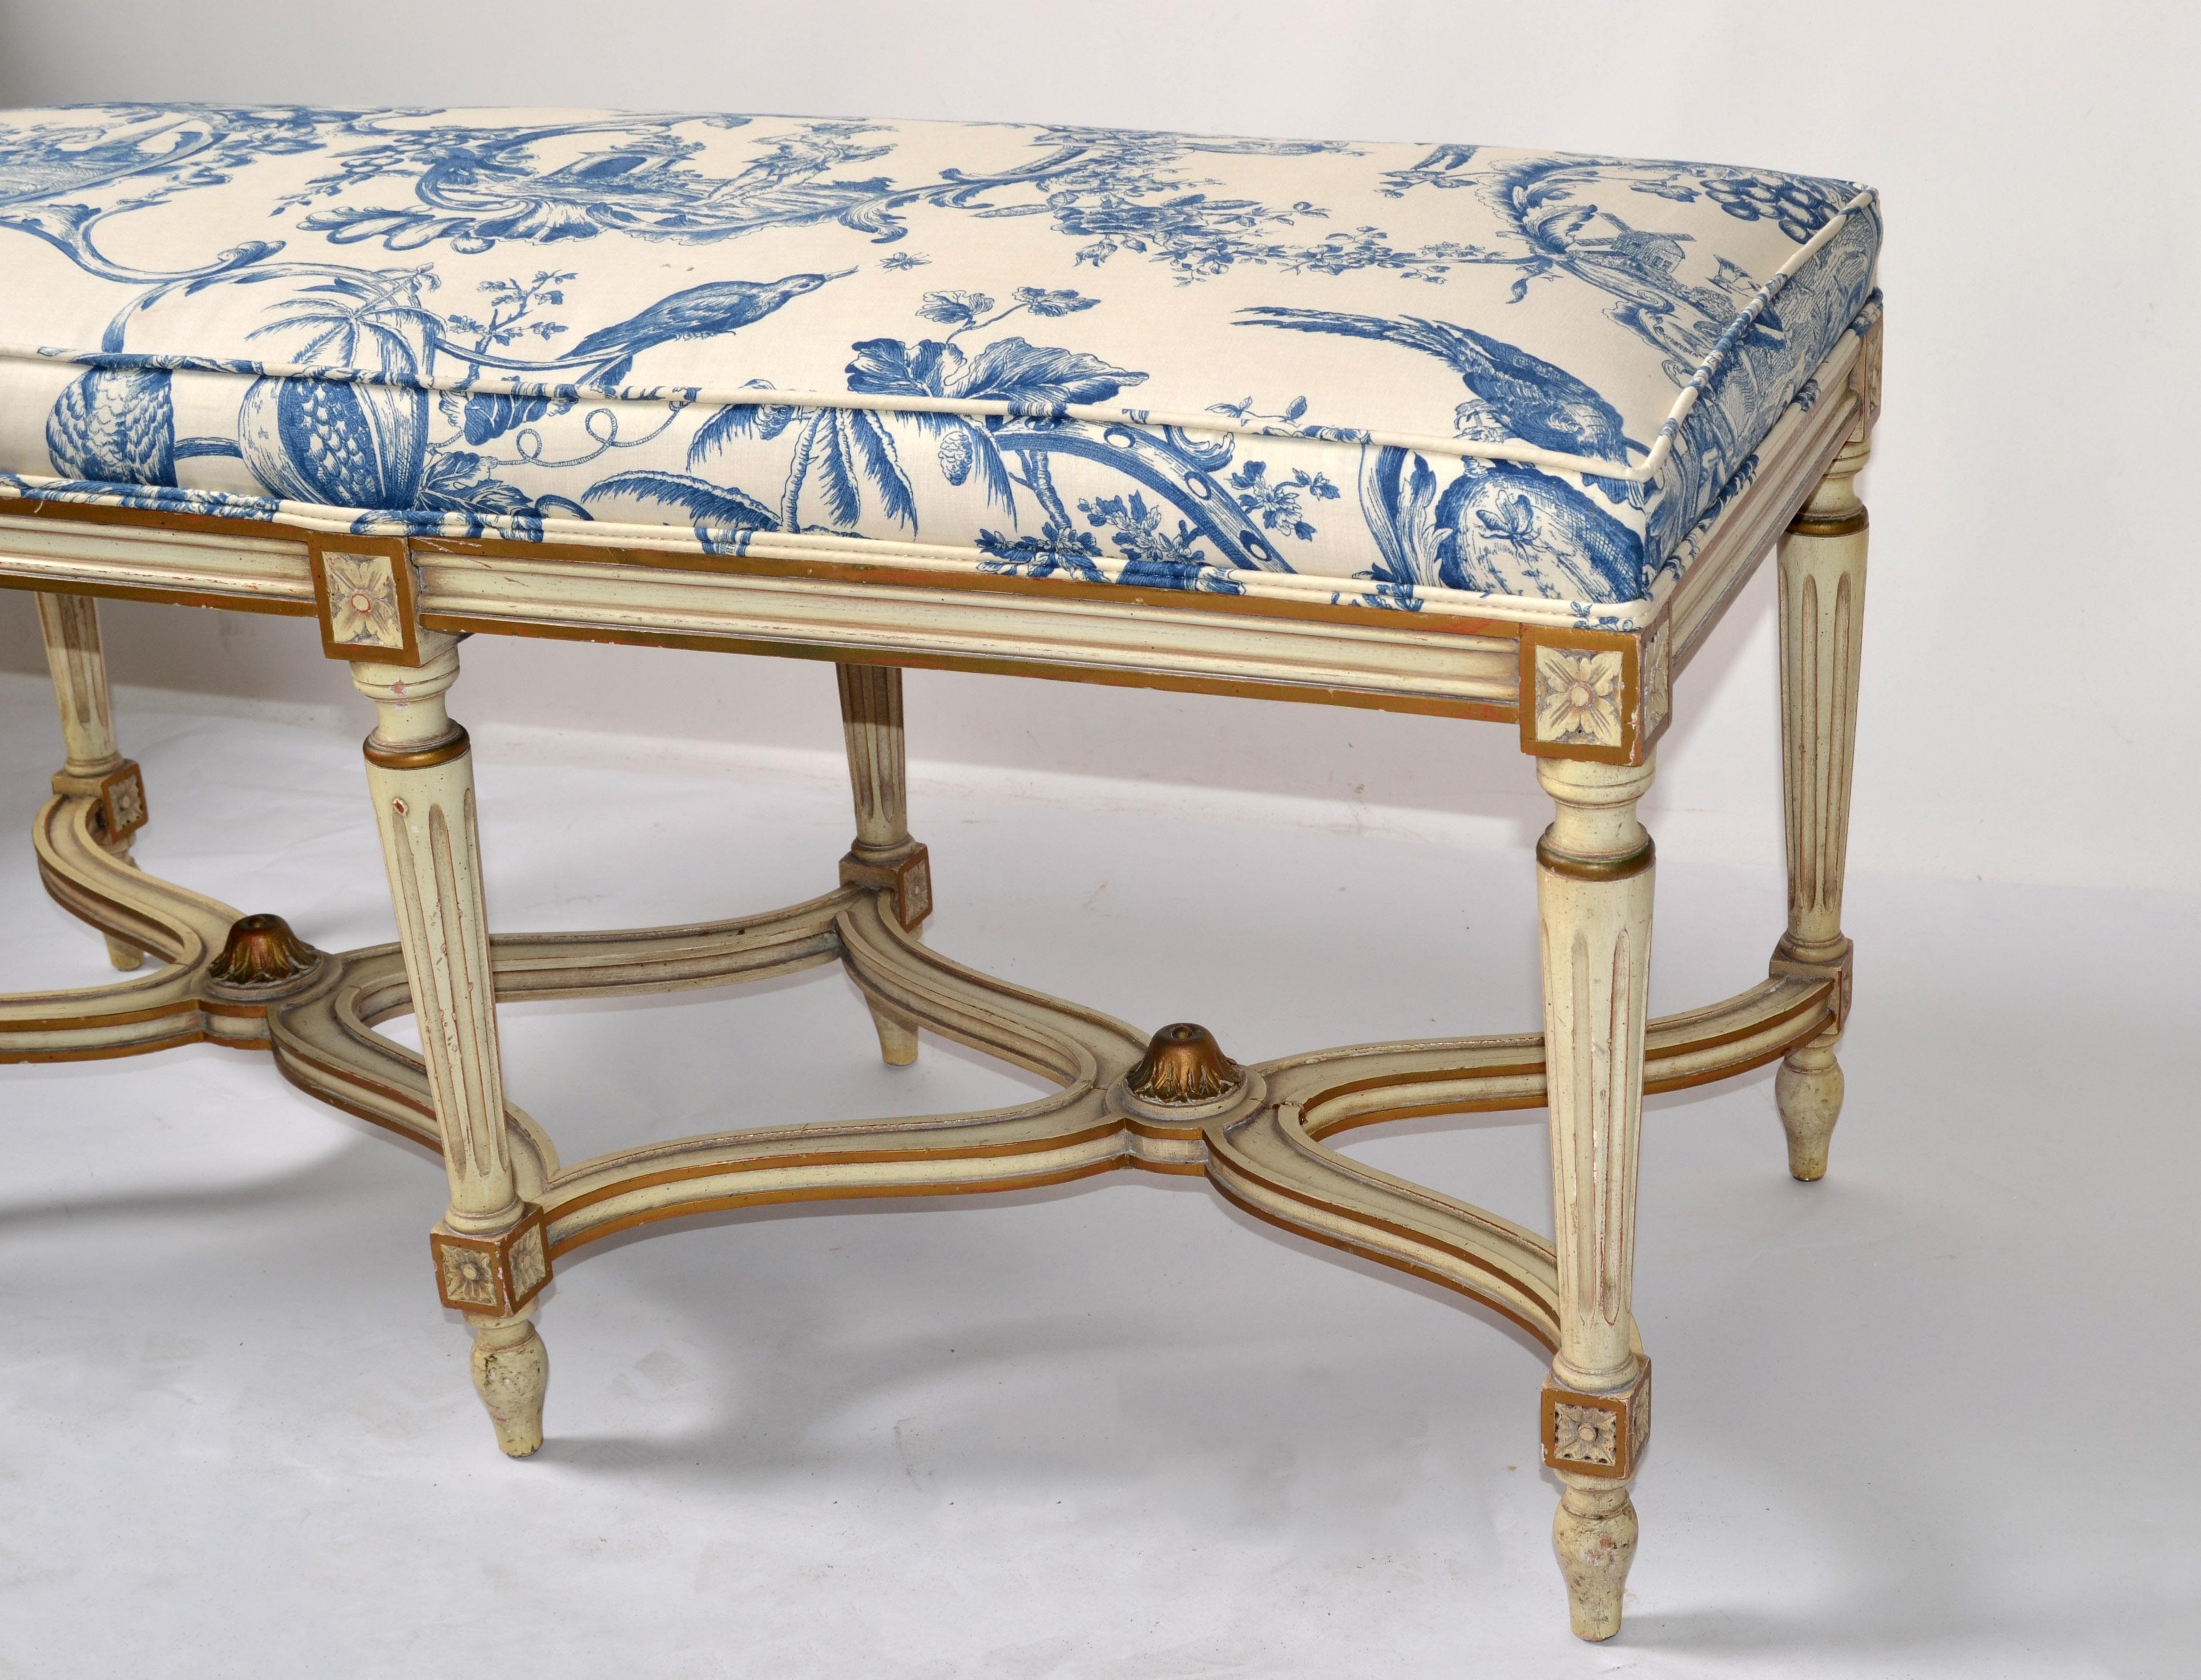 Louis XVI Bench Karges Furniture Co. Hand Carved Hardwood Blue Motif Fabric For Sale 4